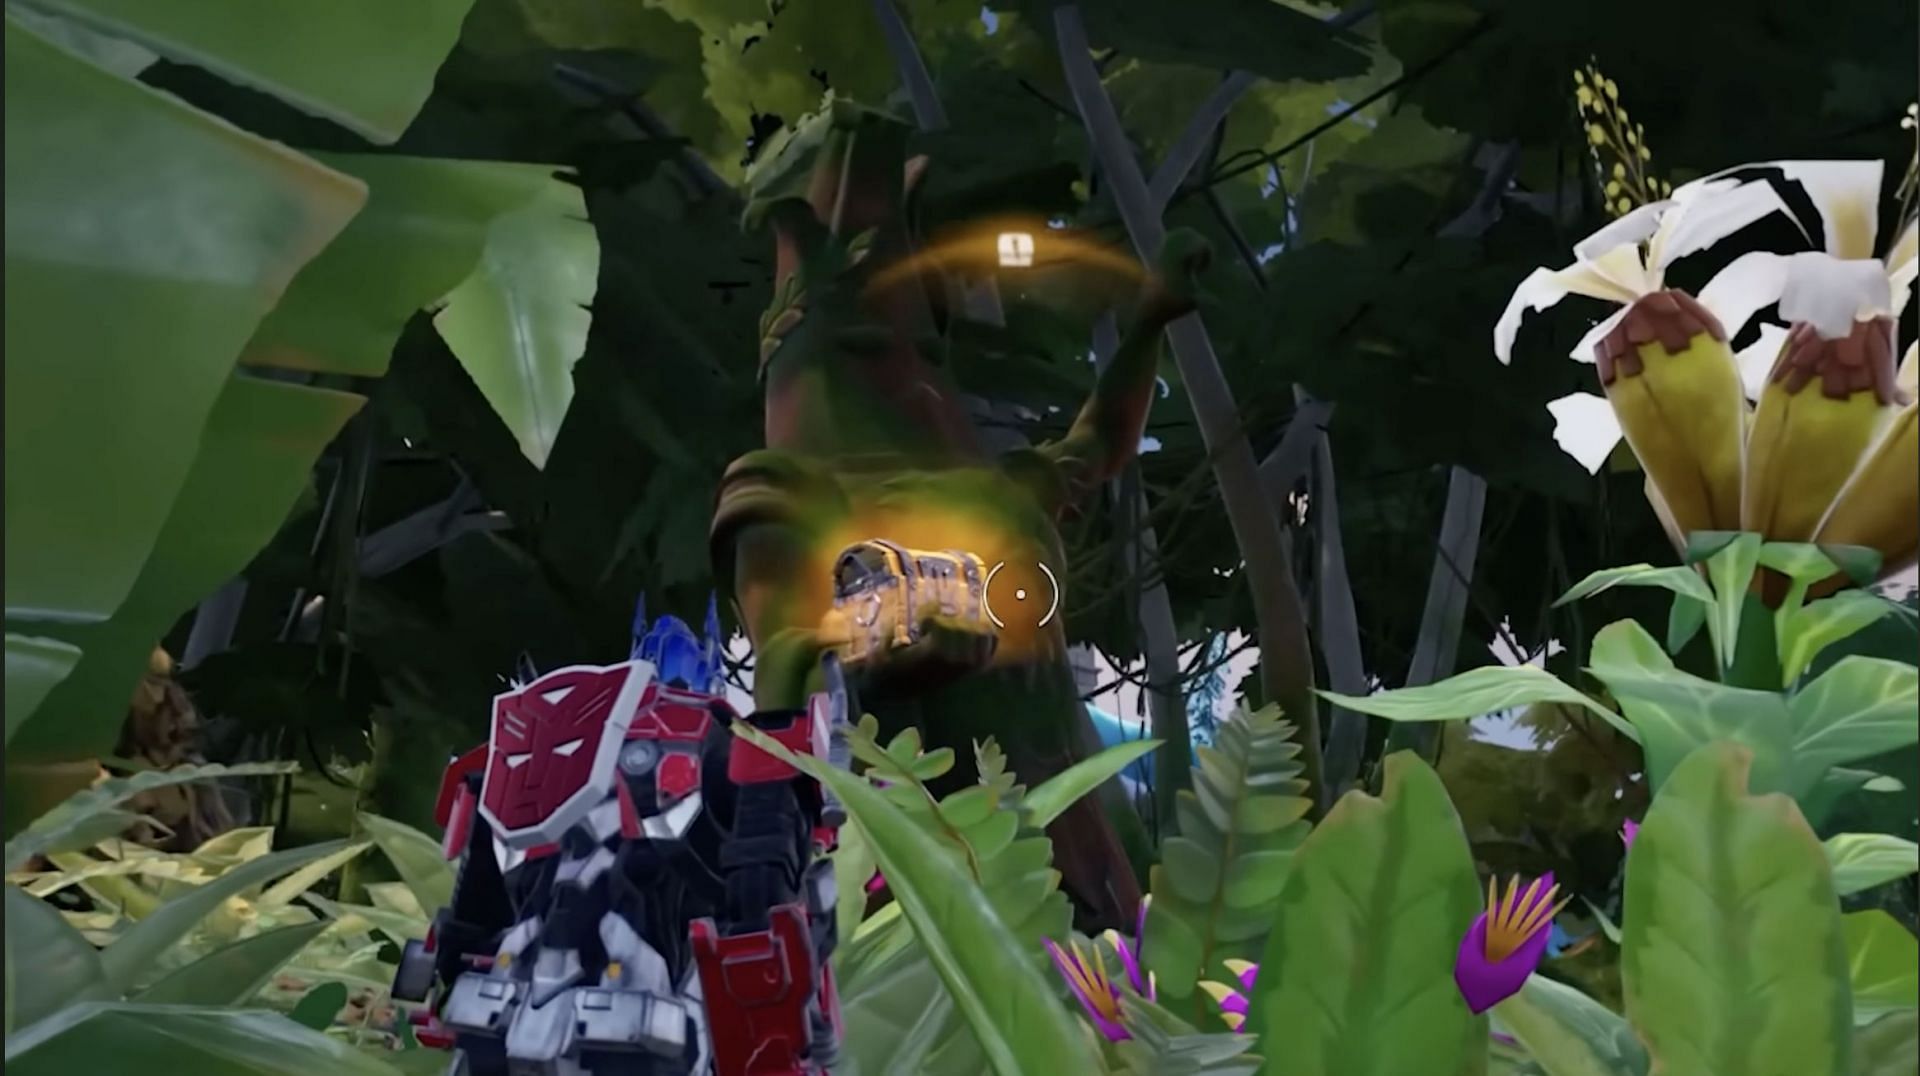 A shrine to Peely on the new map (Image via CommunicGaming on YouTube)